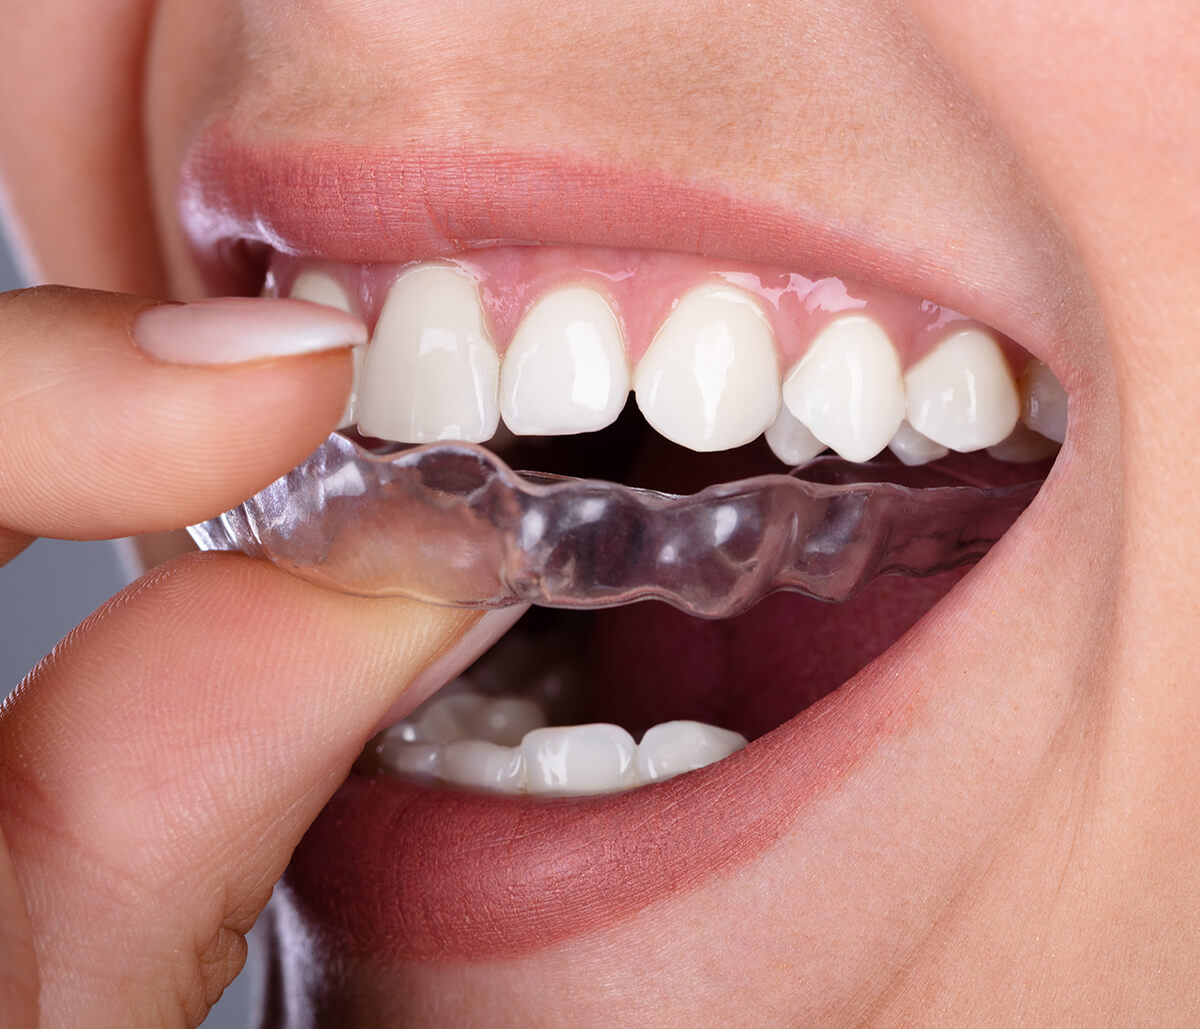 Invisalign Clear Braces Treatment for an Underbite in NYCDr. Jacquie